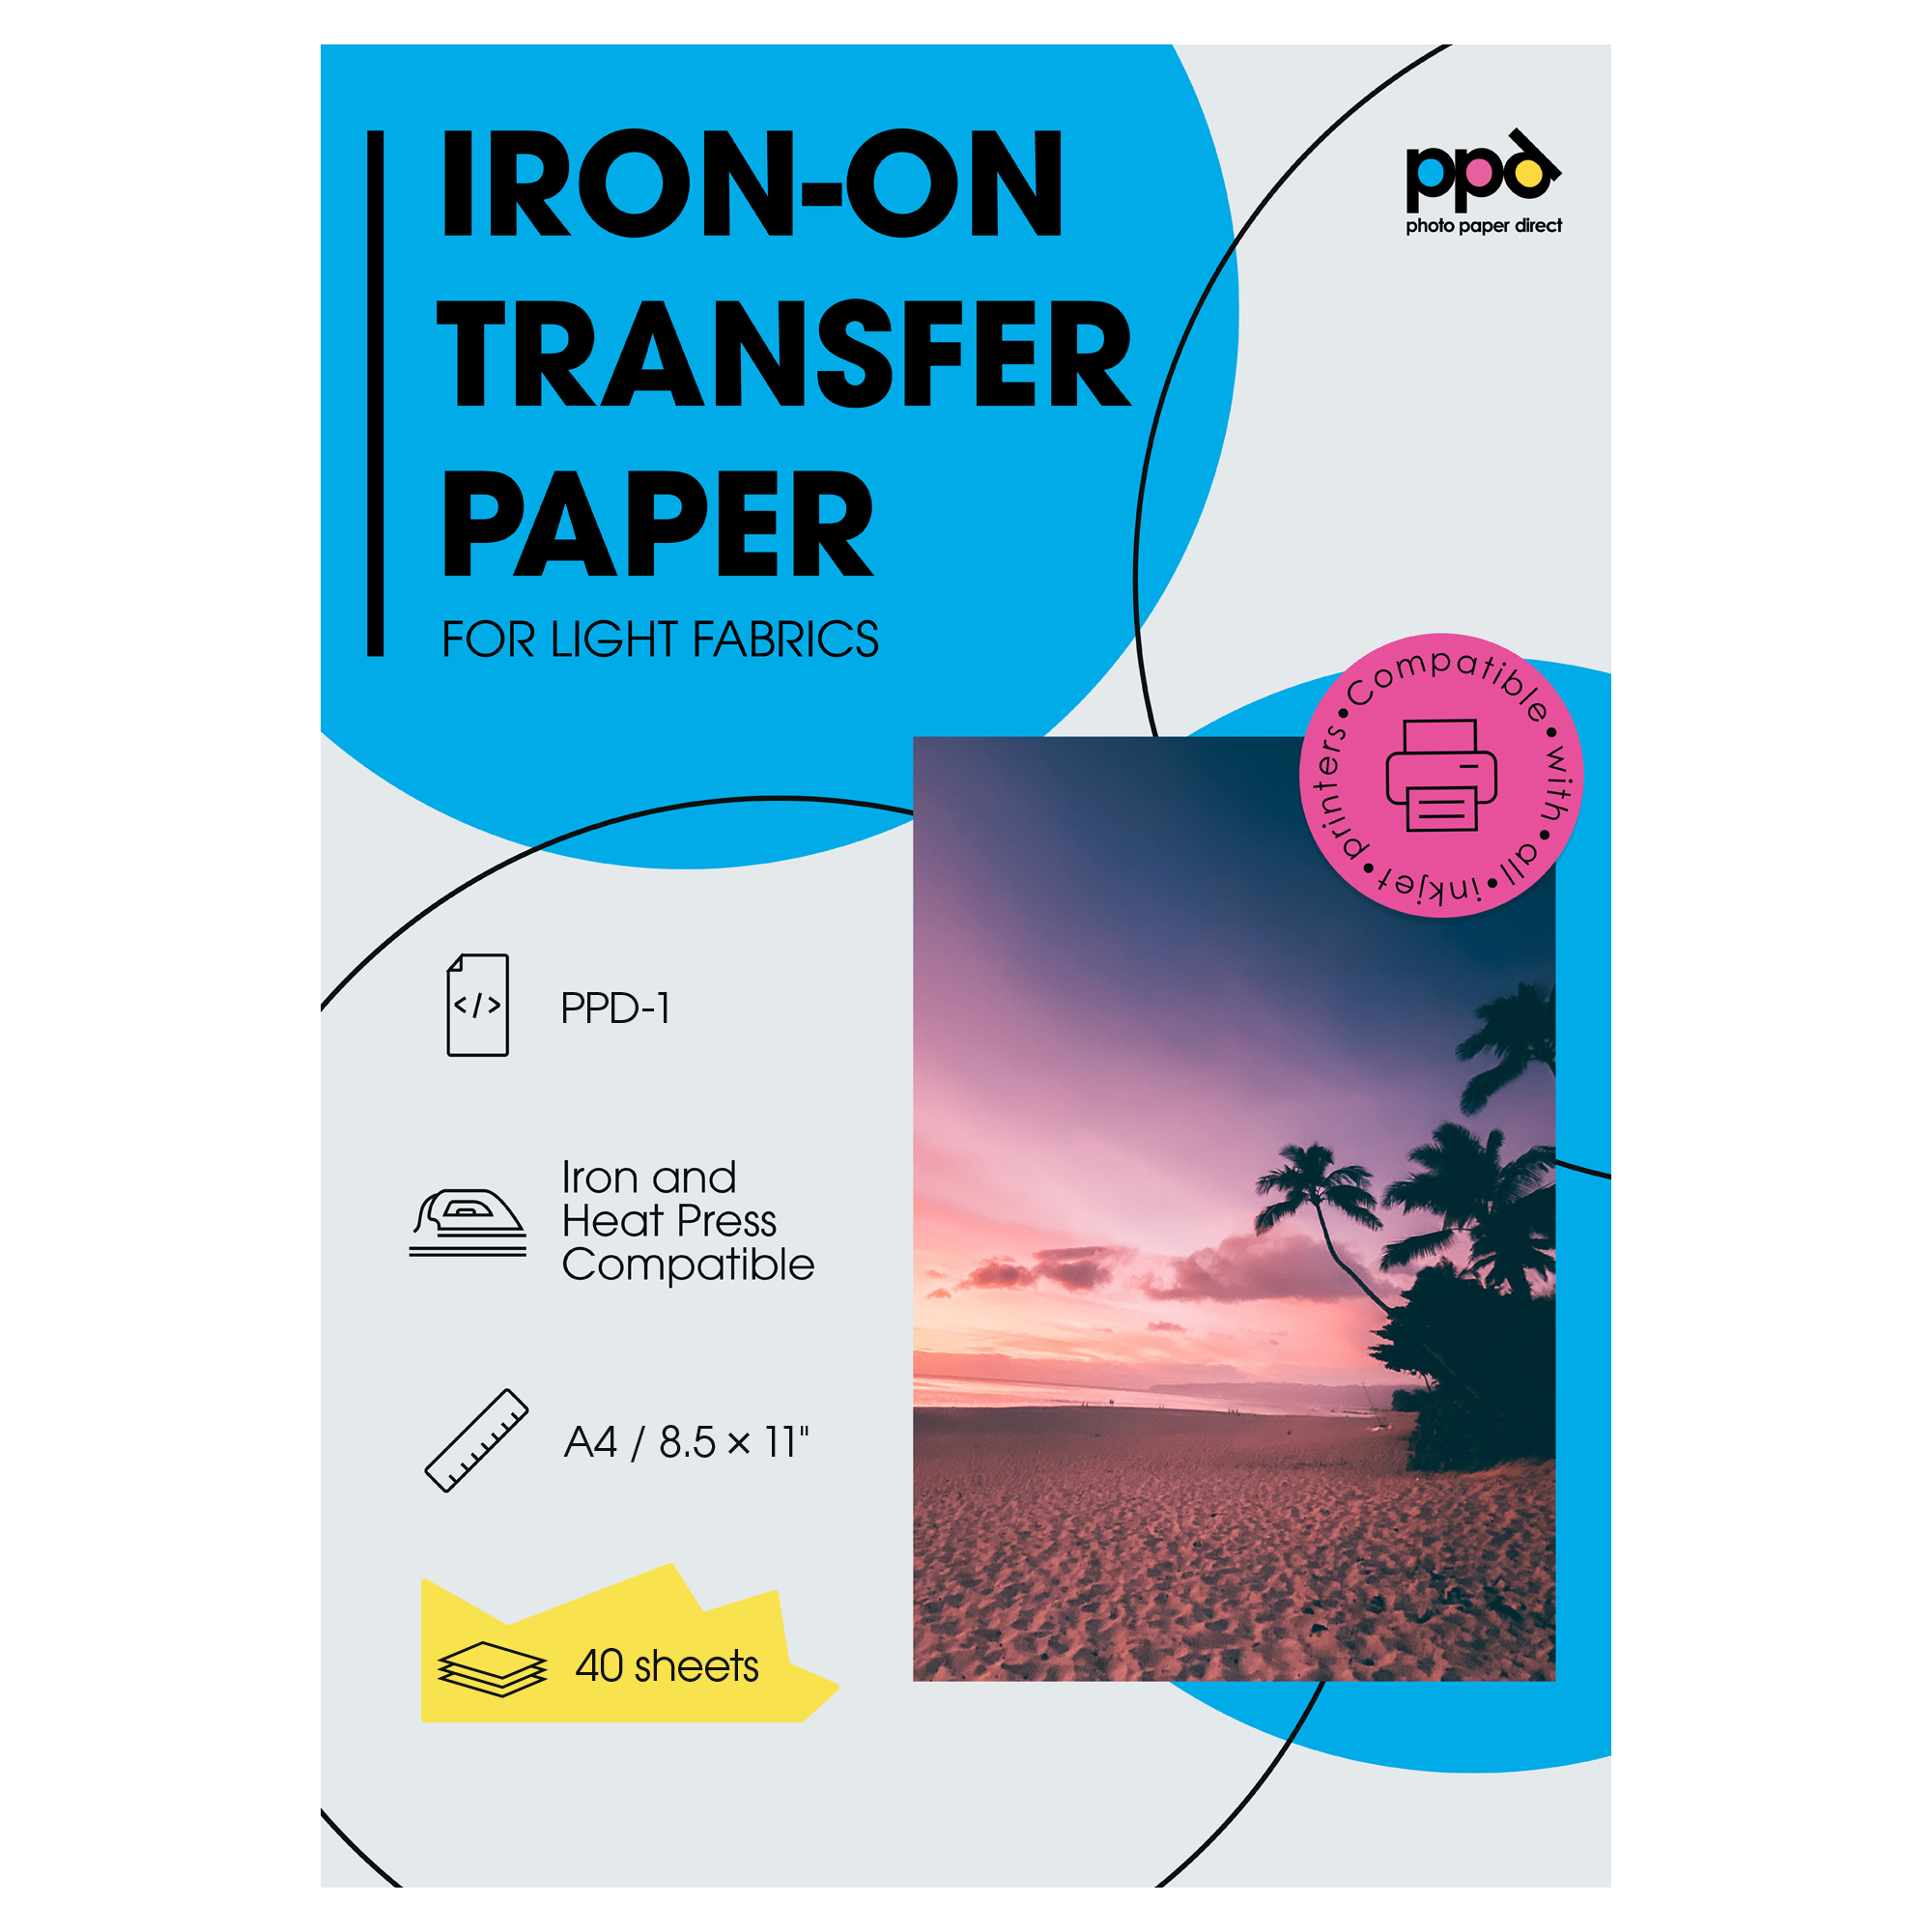 PPD Inkjet Premium T Shirt Transfer Paper - Iron On for Dark Fabric - 8.5 x  11 inch Paper Size - 20 Sheet Count - PPD-4-20